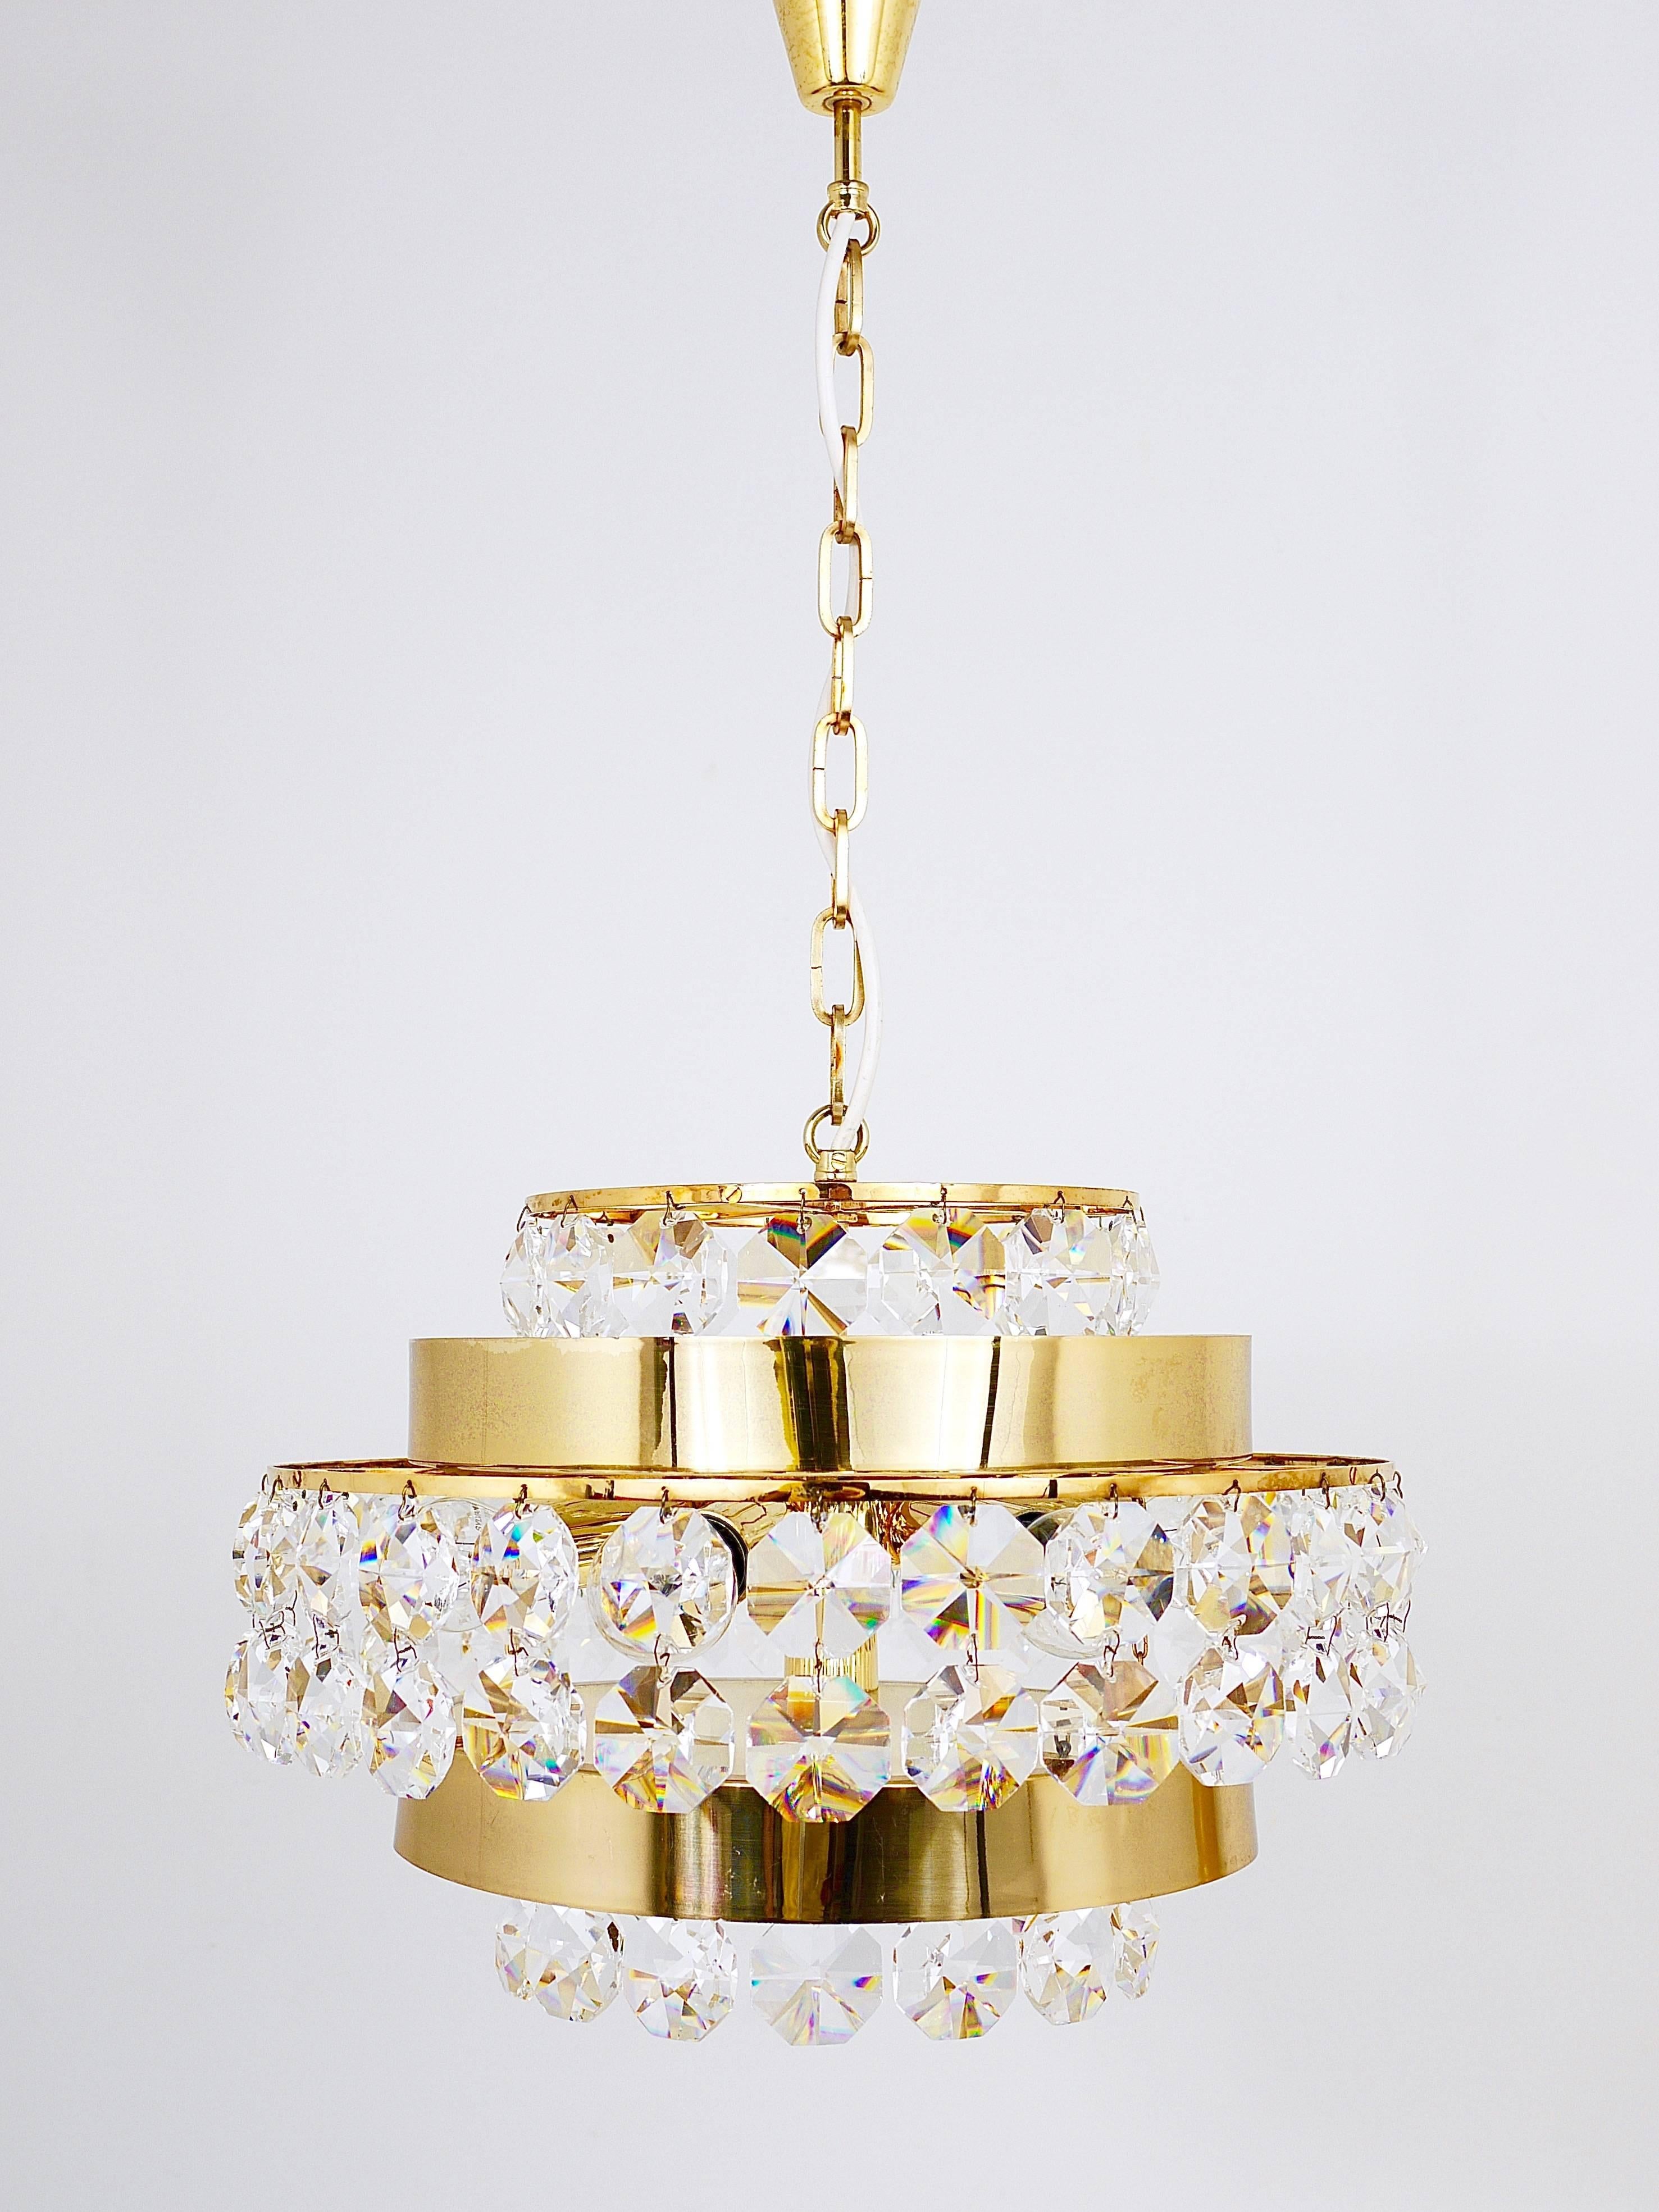 A beautiful gilt brass chandelier crafted in the 1970s by Bakalowits & Sohne of Austria. This exquisite piece features three tiers adorned with large, octagonal diamond-shaped faceted crystals and is illuminated by six light sources. In very good